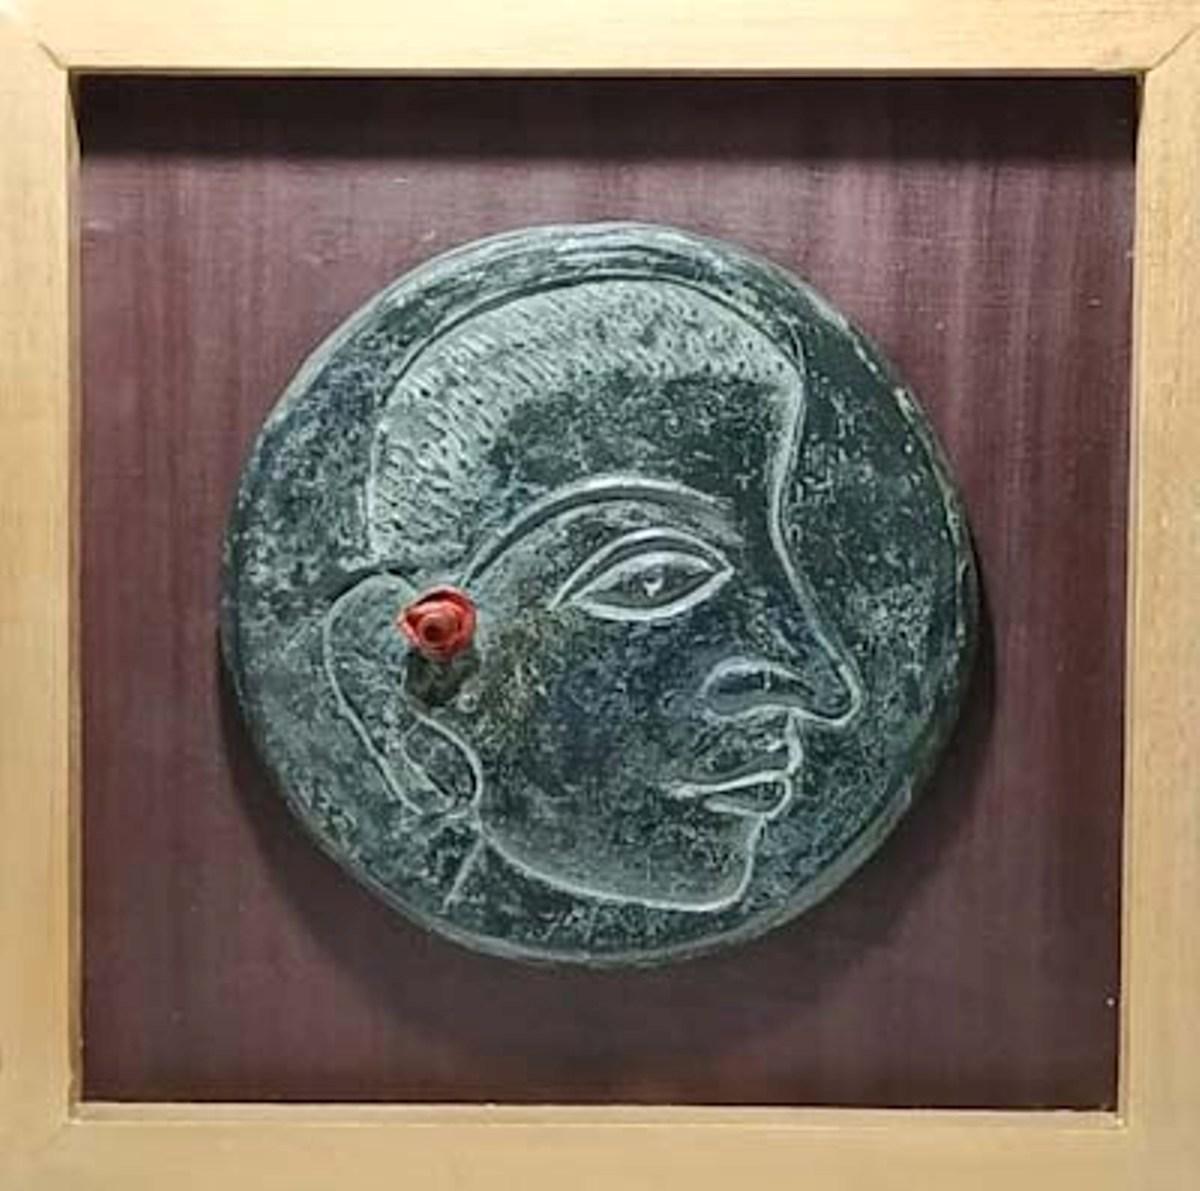 Subrata Biswas Figurative Sculpture - Relief, Face, Bronze Sculpture, Green by Contemporary Indian Artist "In Stock"